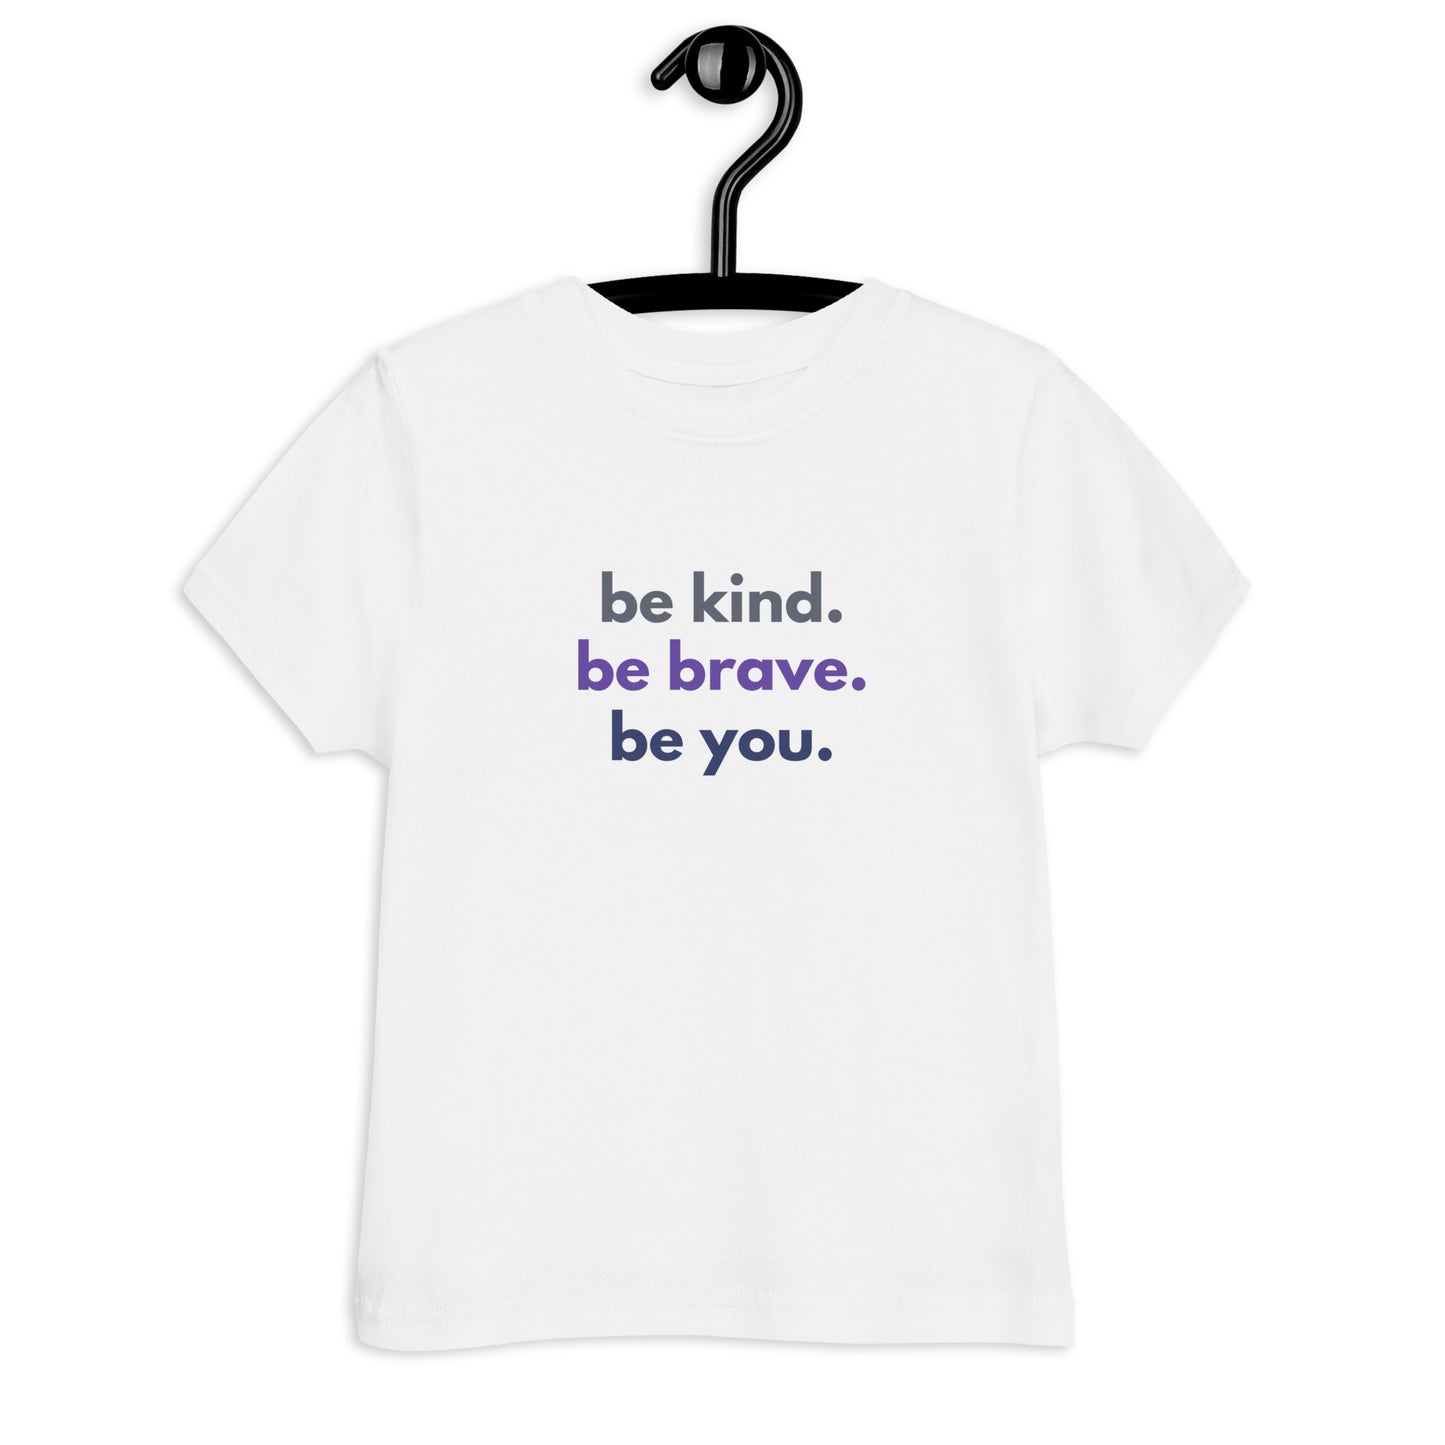 Toddler jersey t-shirt - Be kind. Be brave. Be you.